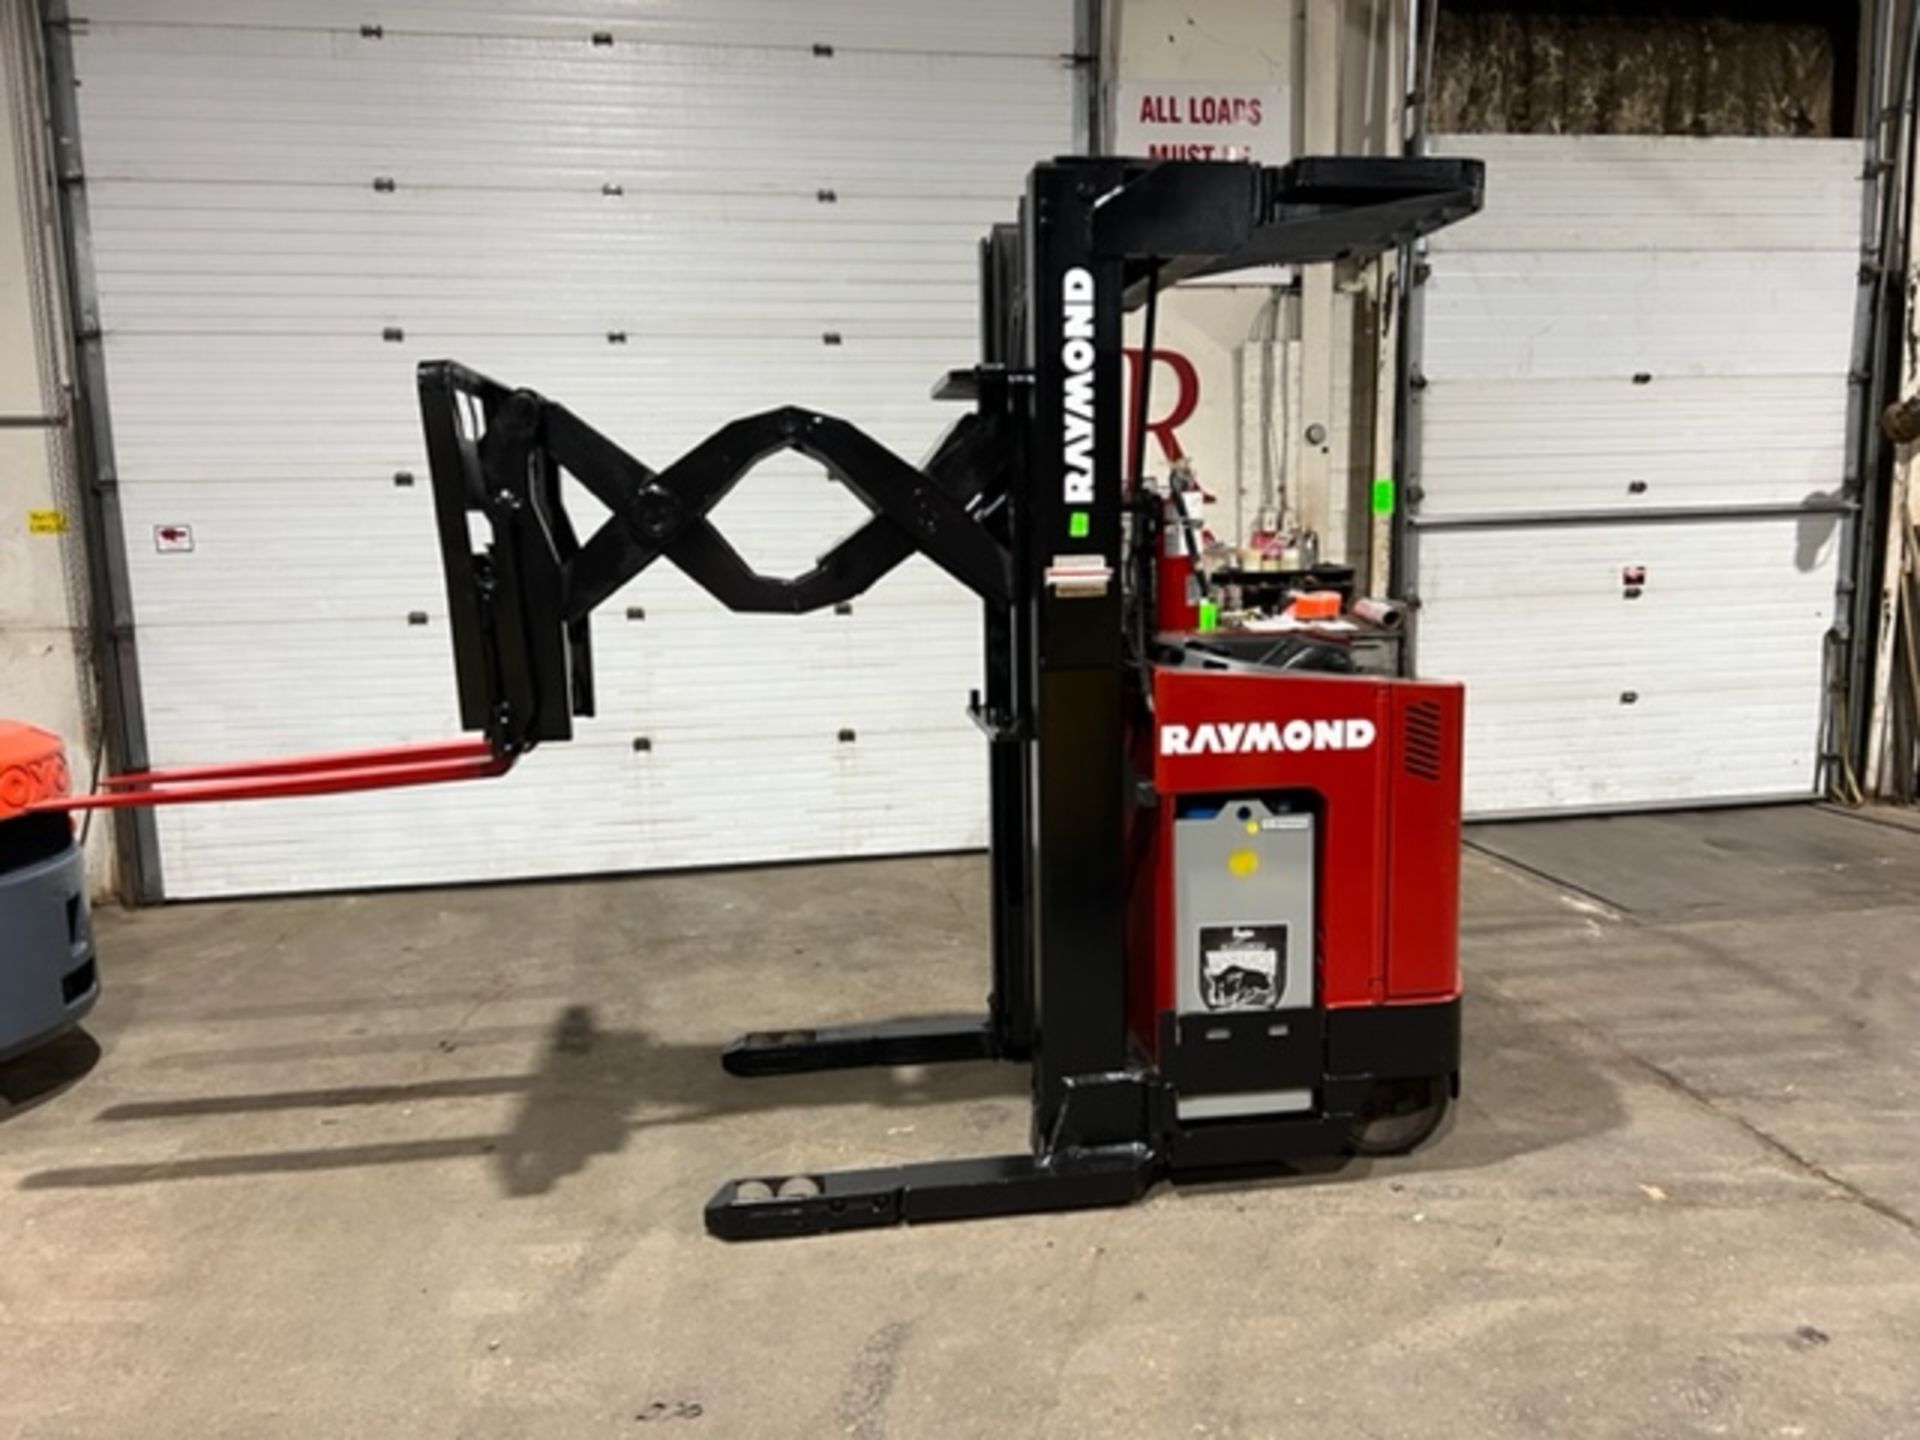 FREE CUSTOMS - NICE Raymond Reach EXTRA REACH Truck 2500lbs Capacity Pallet Lifter with VERY LOW